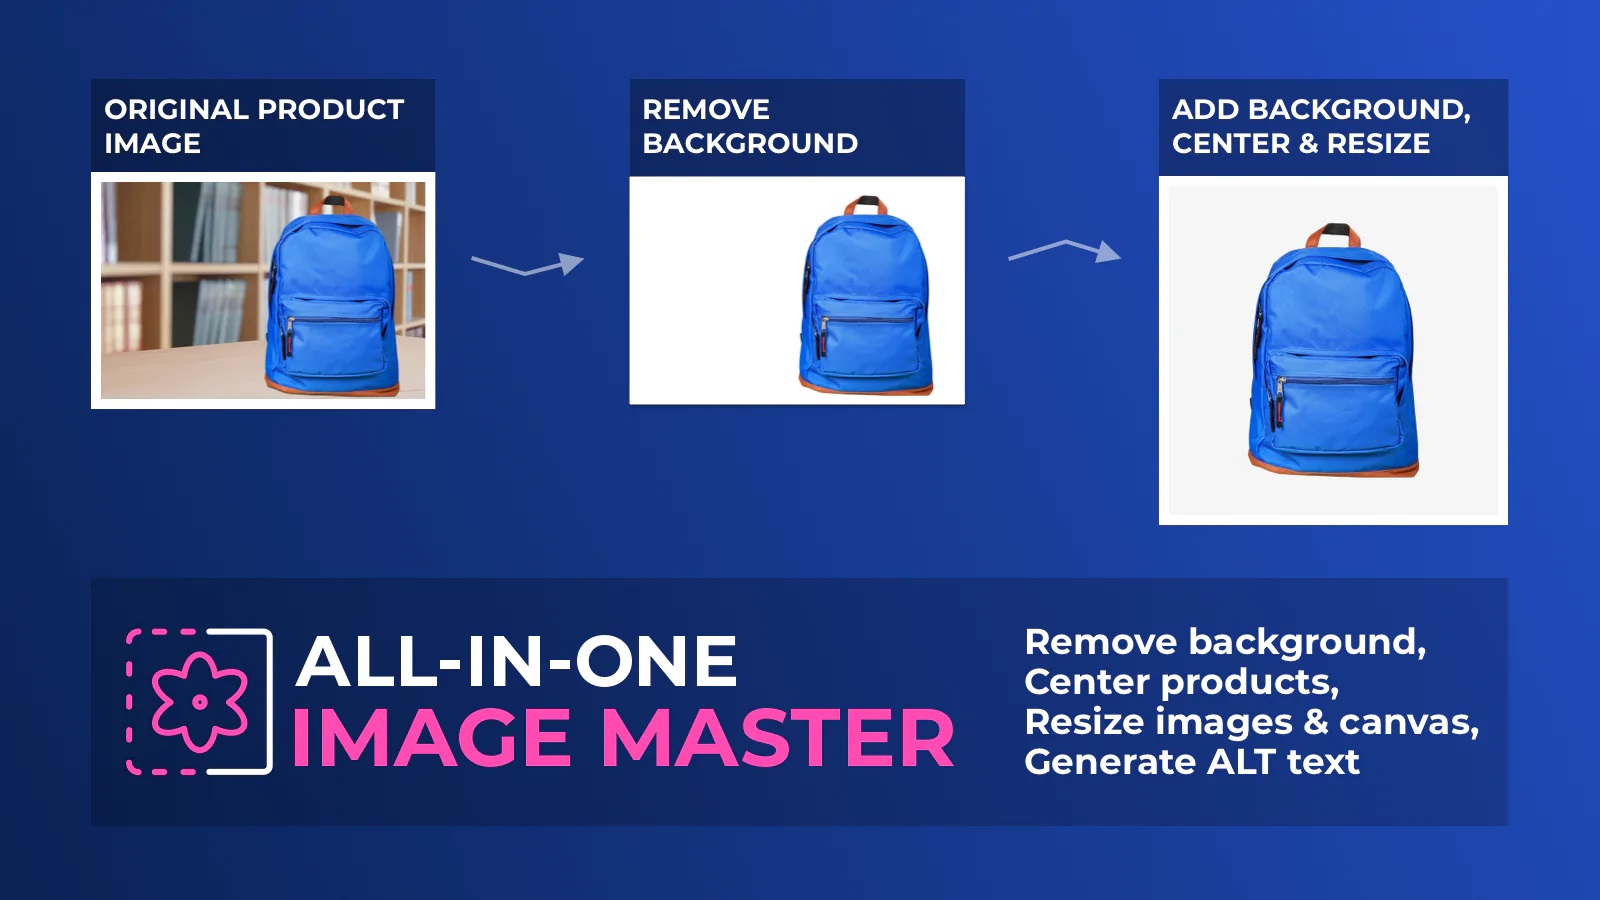 Banner displaying features of the All in One Image Master app